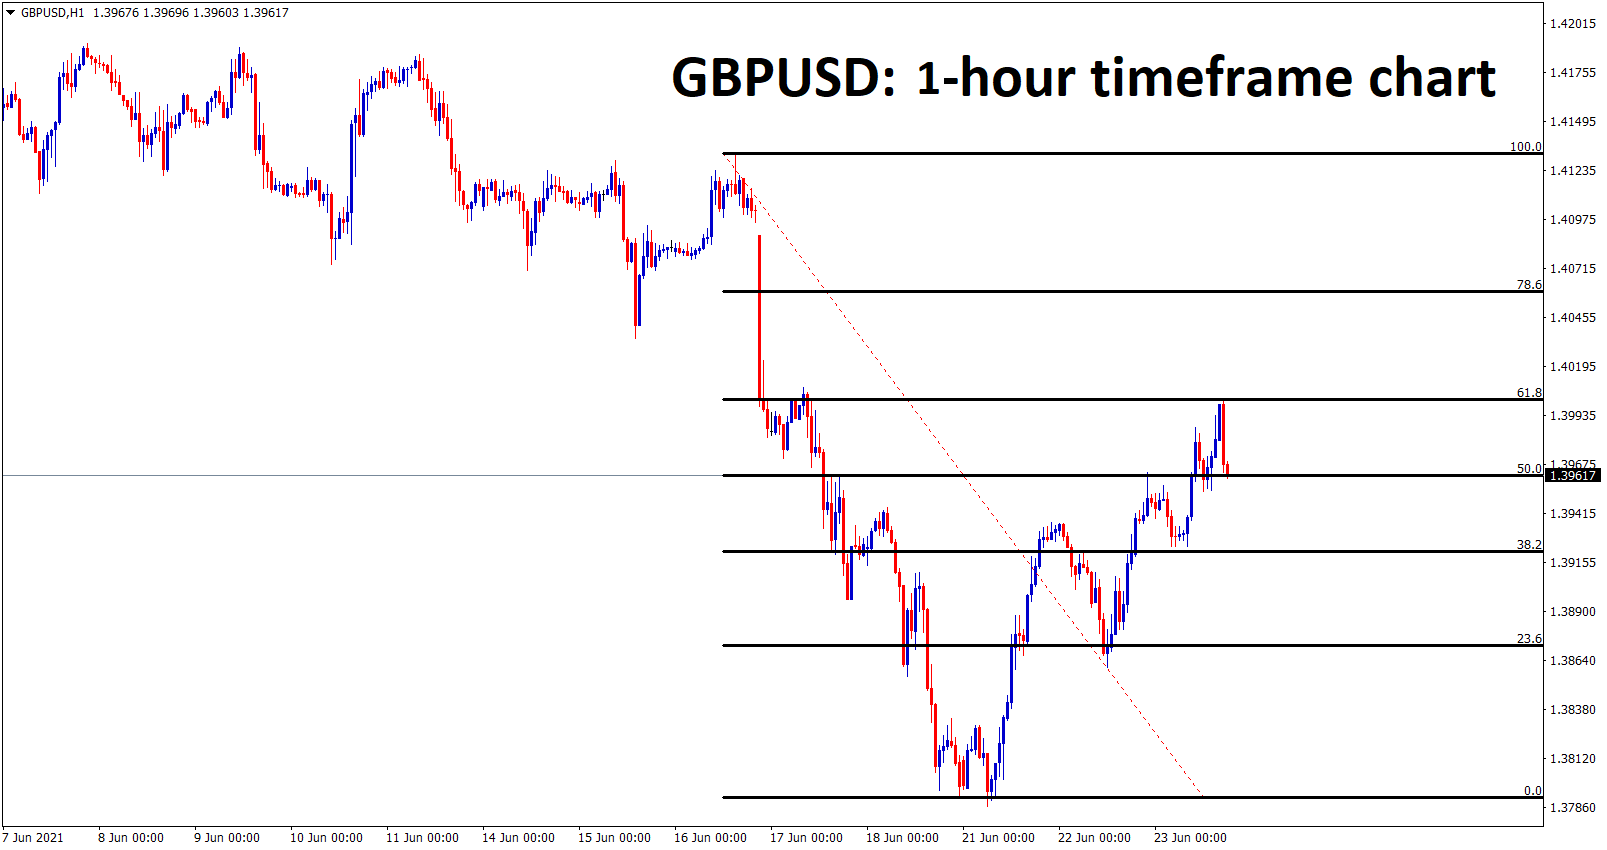 GBPUSD made a 61 correction from the last high